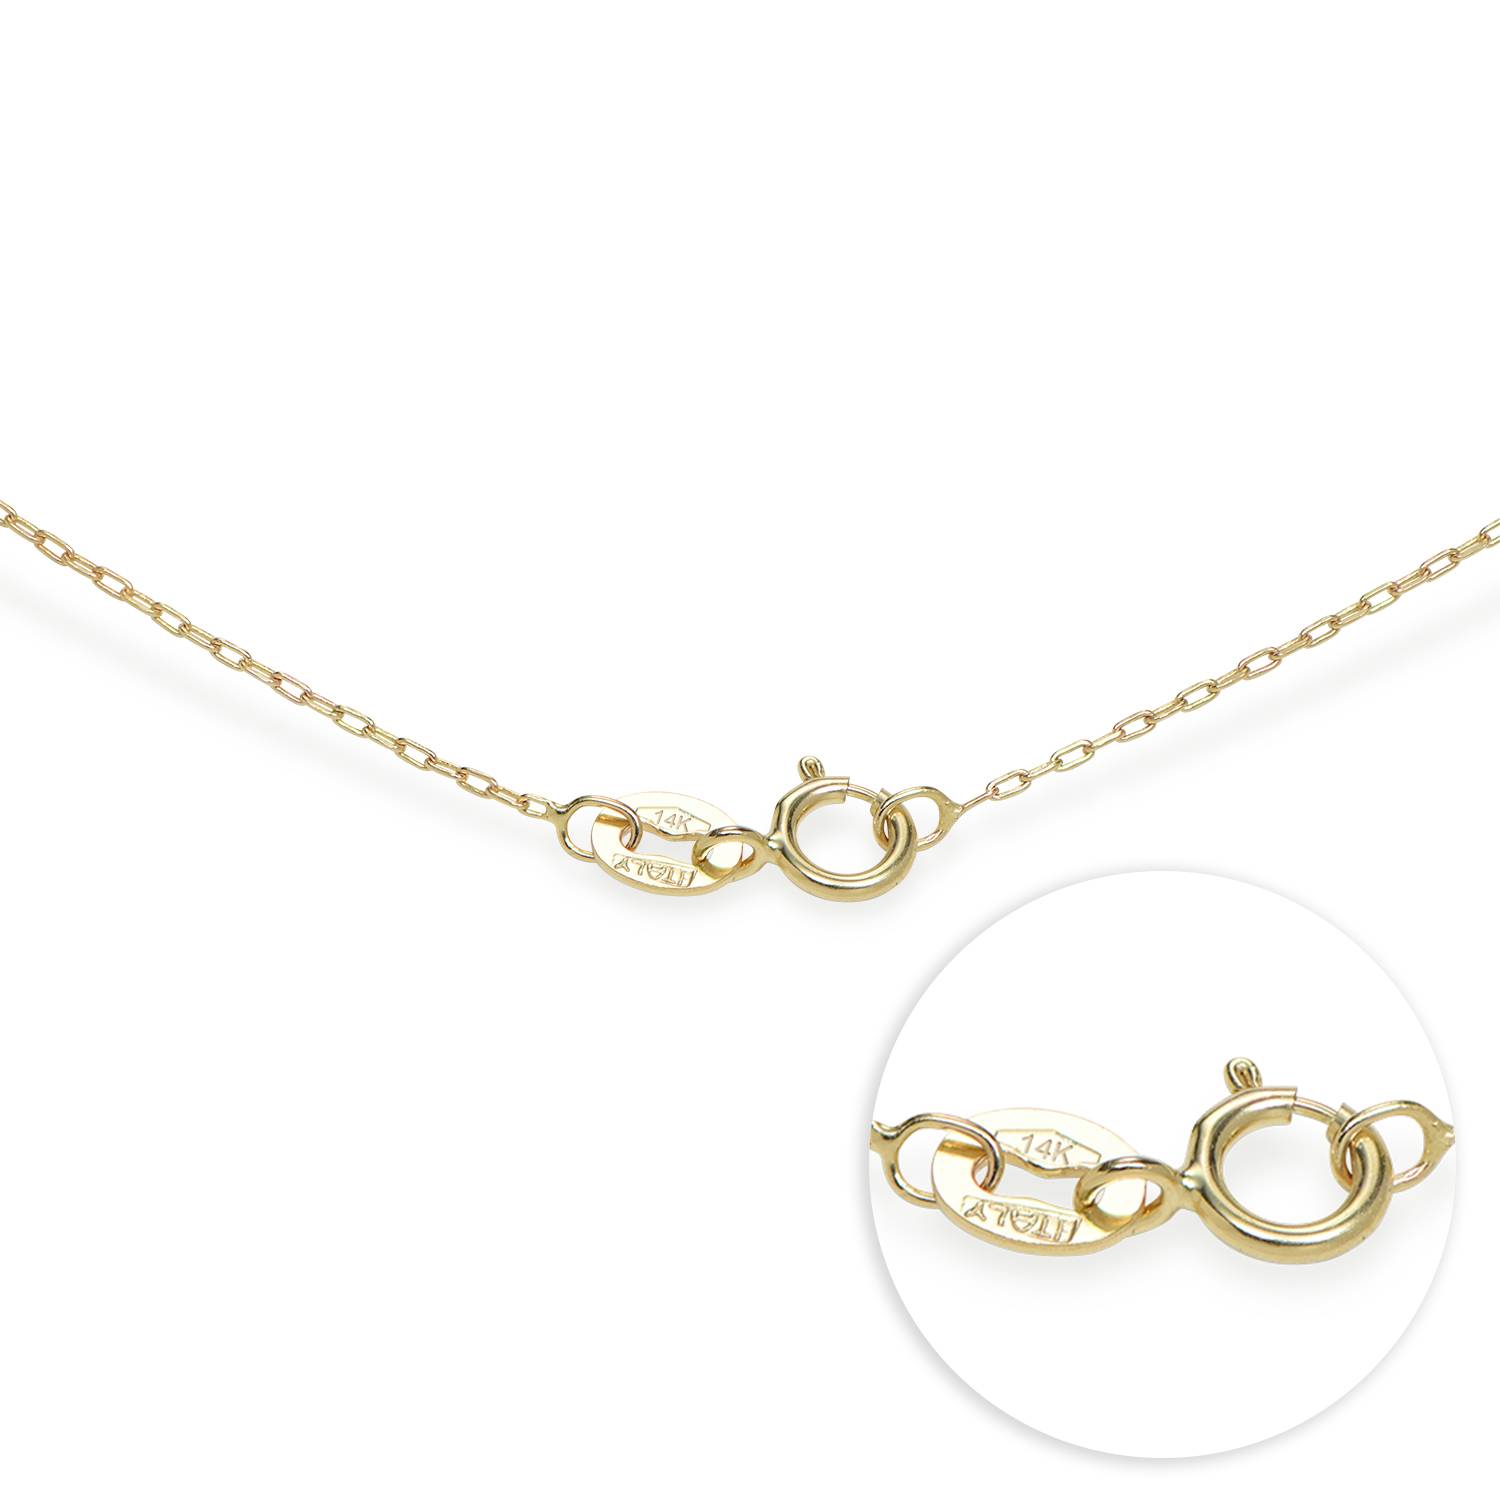 14K Infinity Style Name Necklace-1 product photo